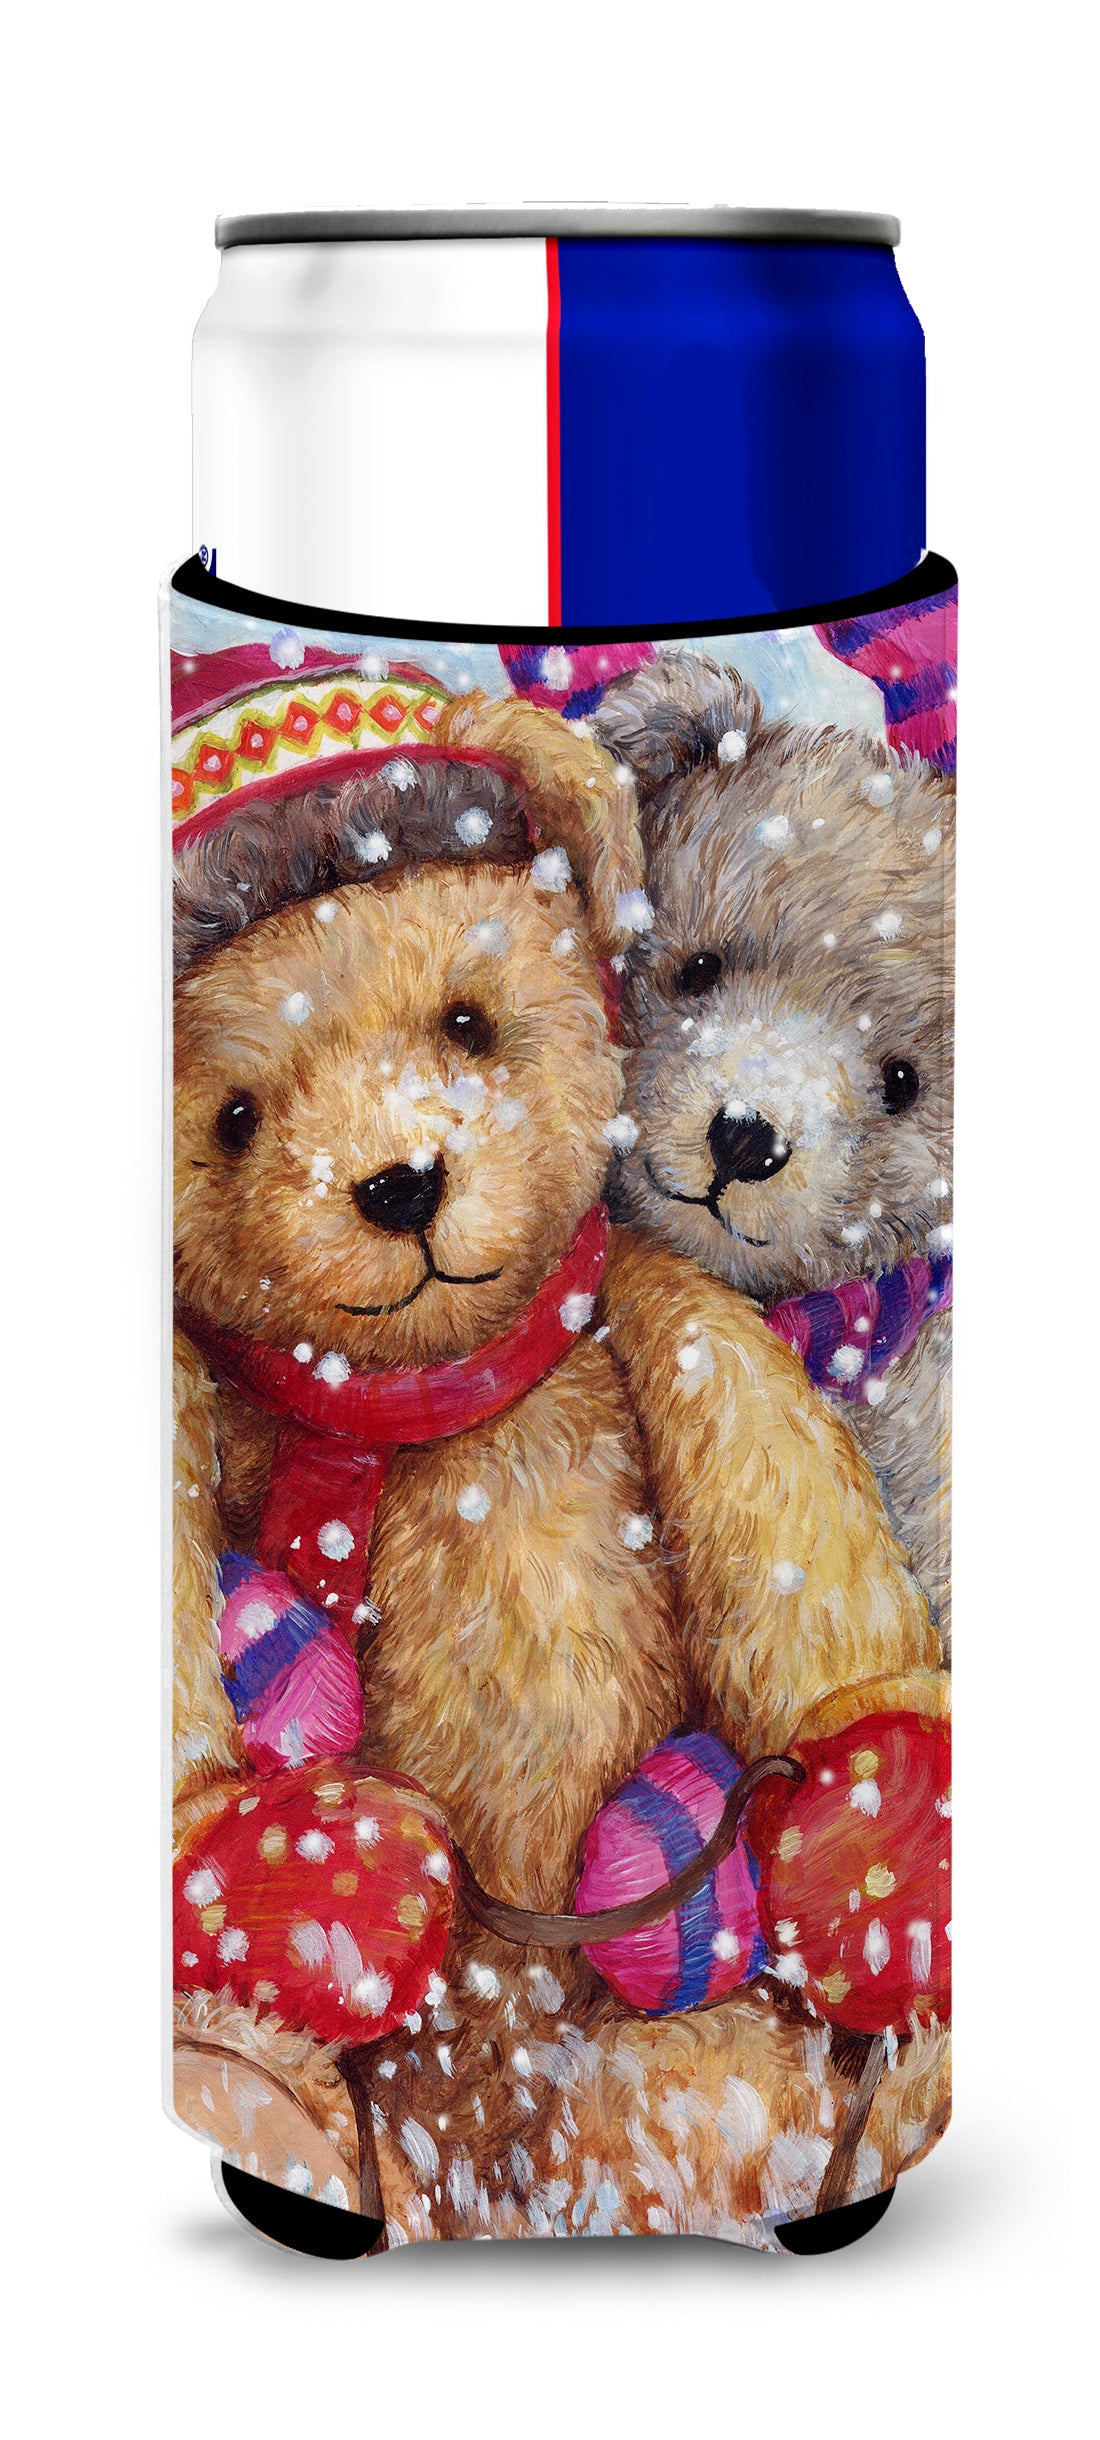 Winter Snow Teddy Bears Ultra Beverage Insulators for slim cans CDCO0461MUK